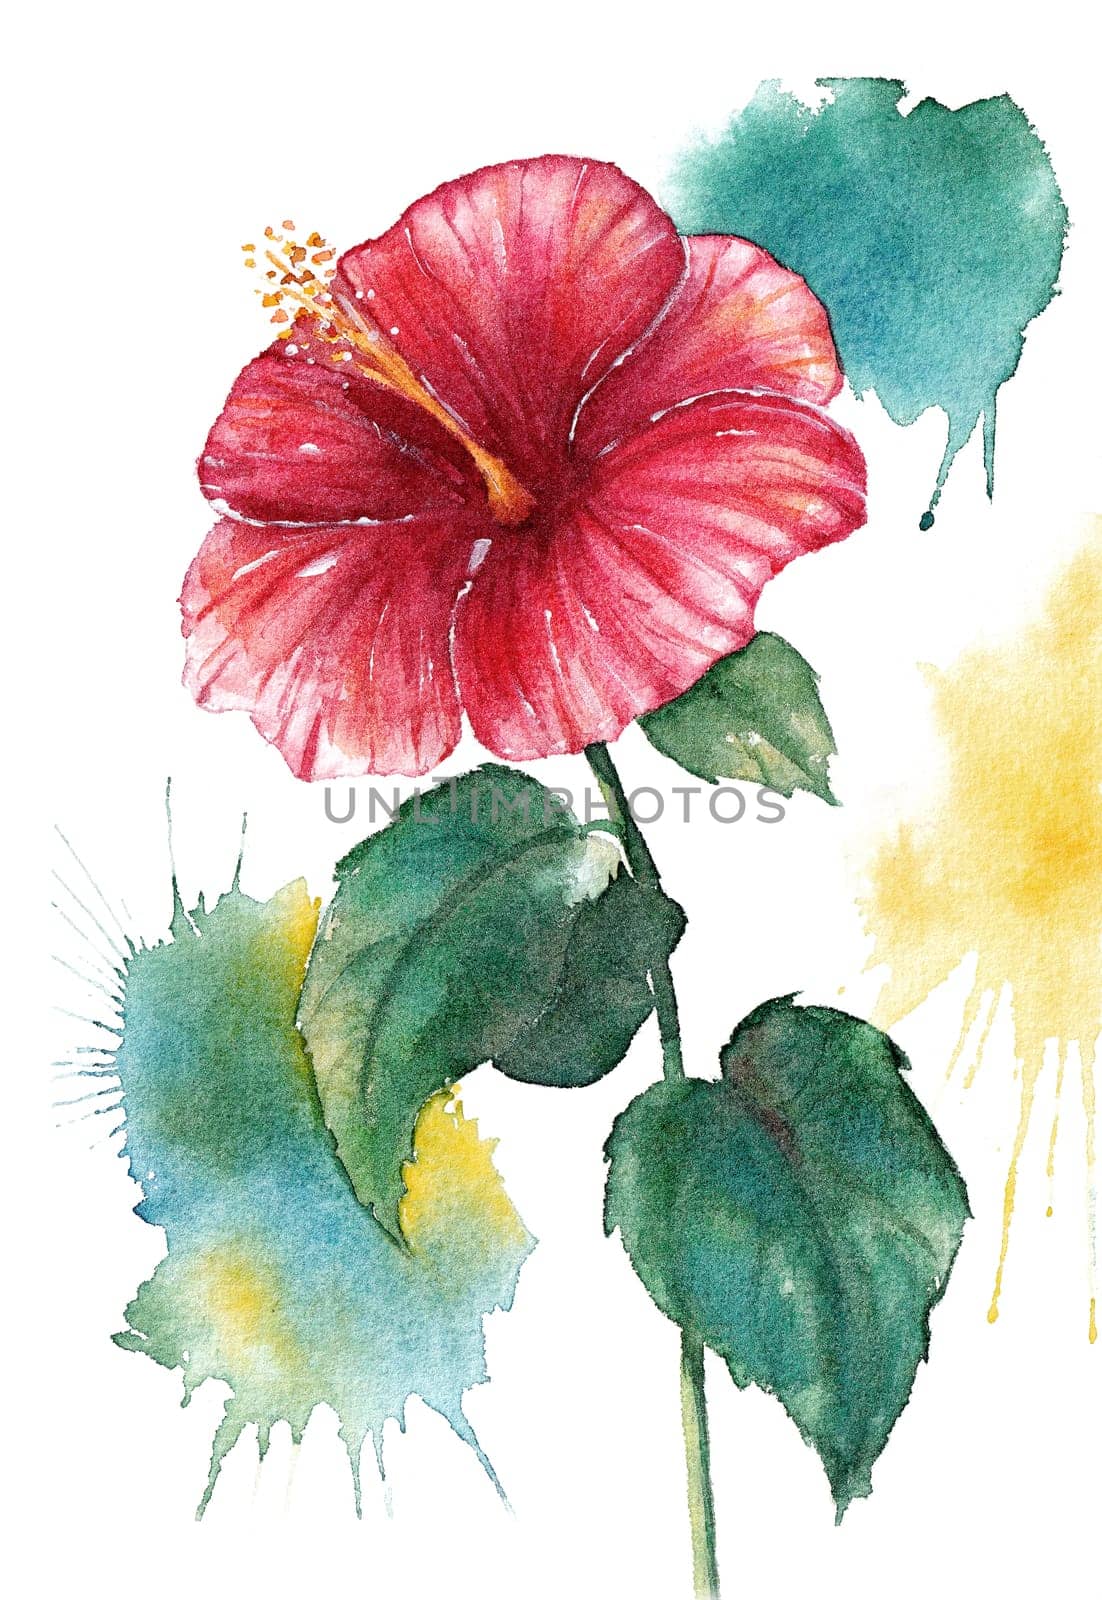 Watercolor red hibiscus flower isolated on white background with watercolor splashes, tropical invitation, invitation flower card. Hand drawn illustration